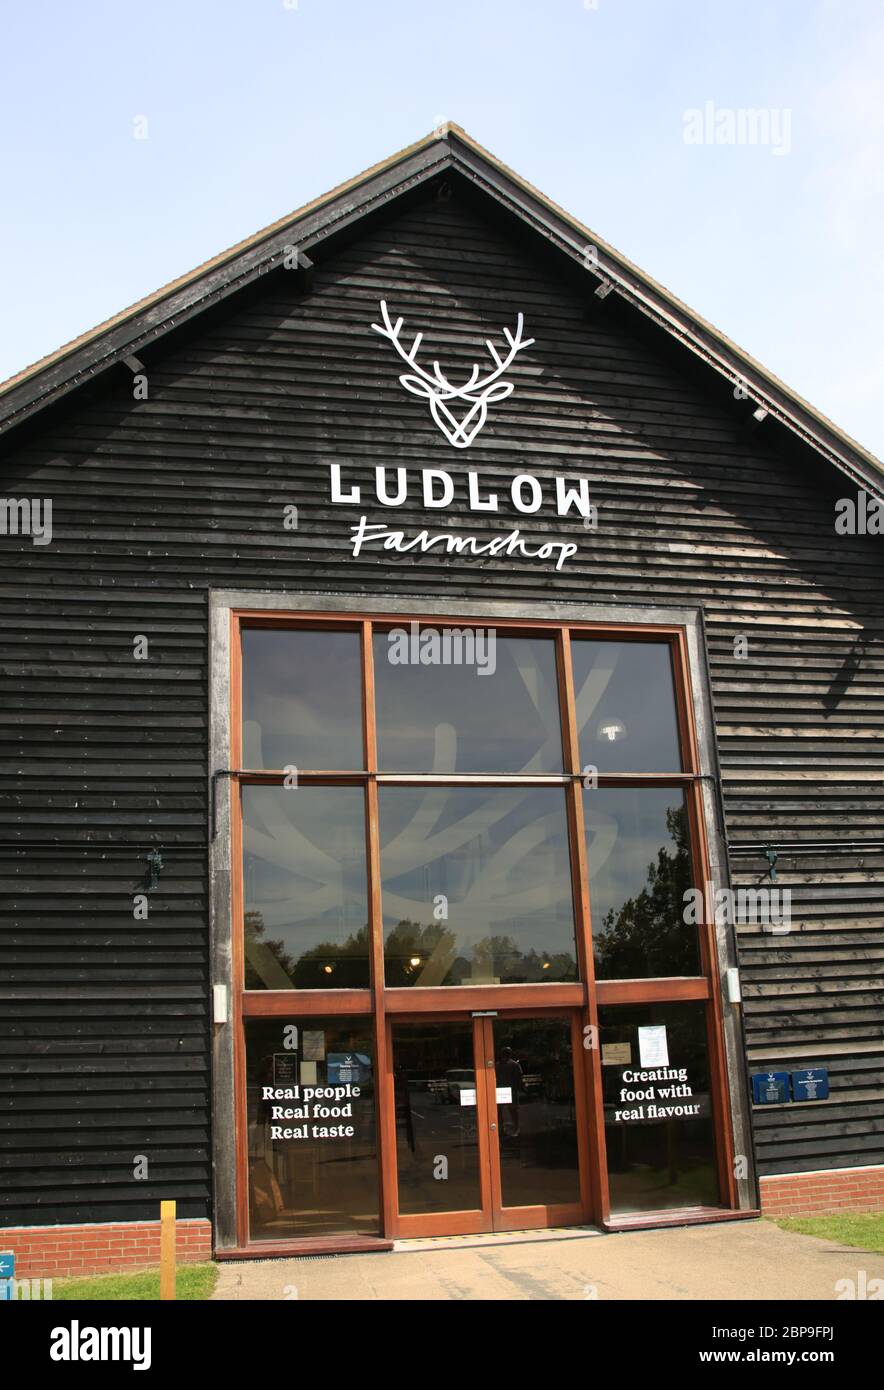 The Ludlow farmshop (formerly Ludlow food centre) Bromfield, Ludlow, Shropshire, UK. Stock Photo